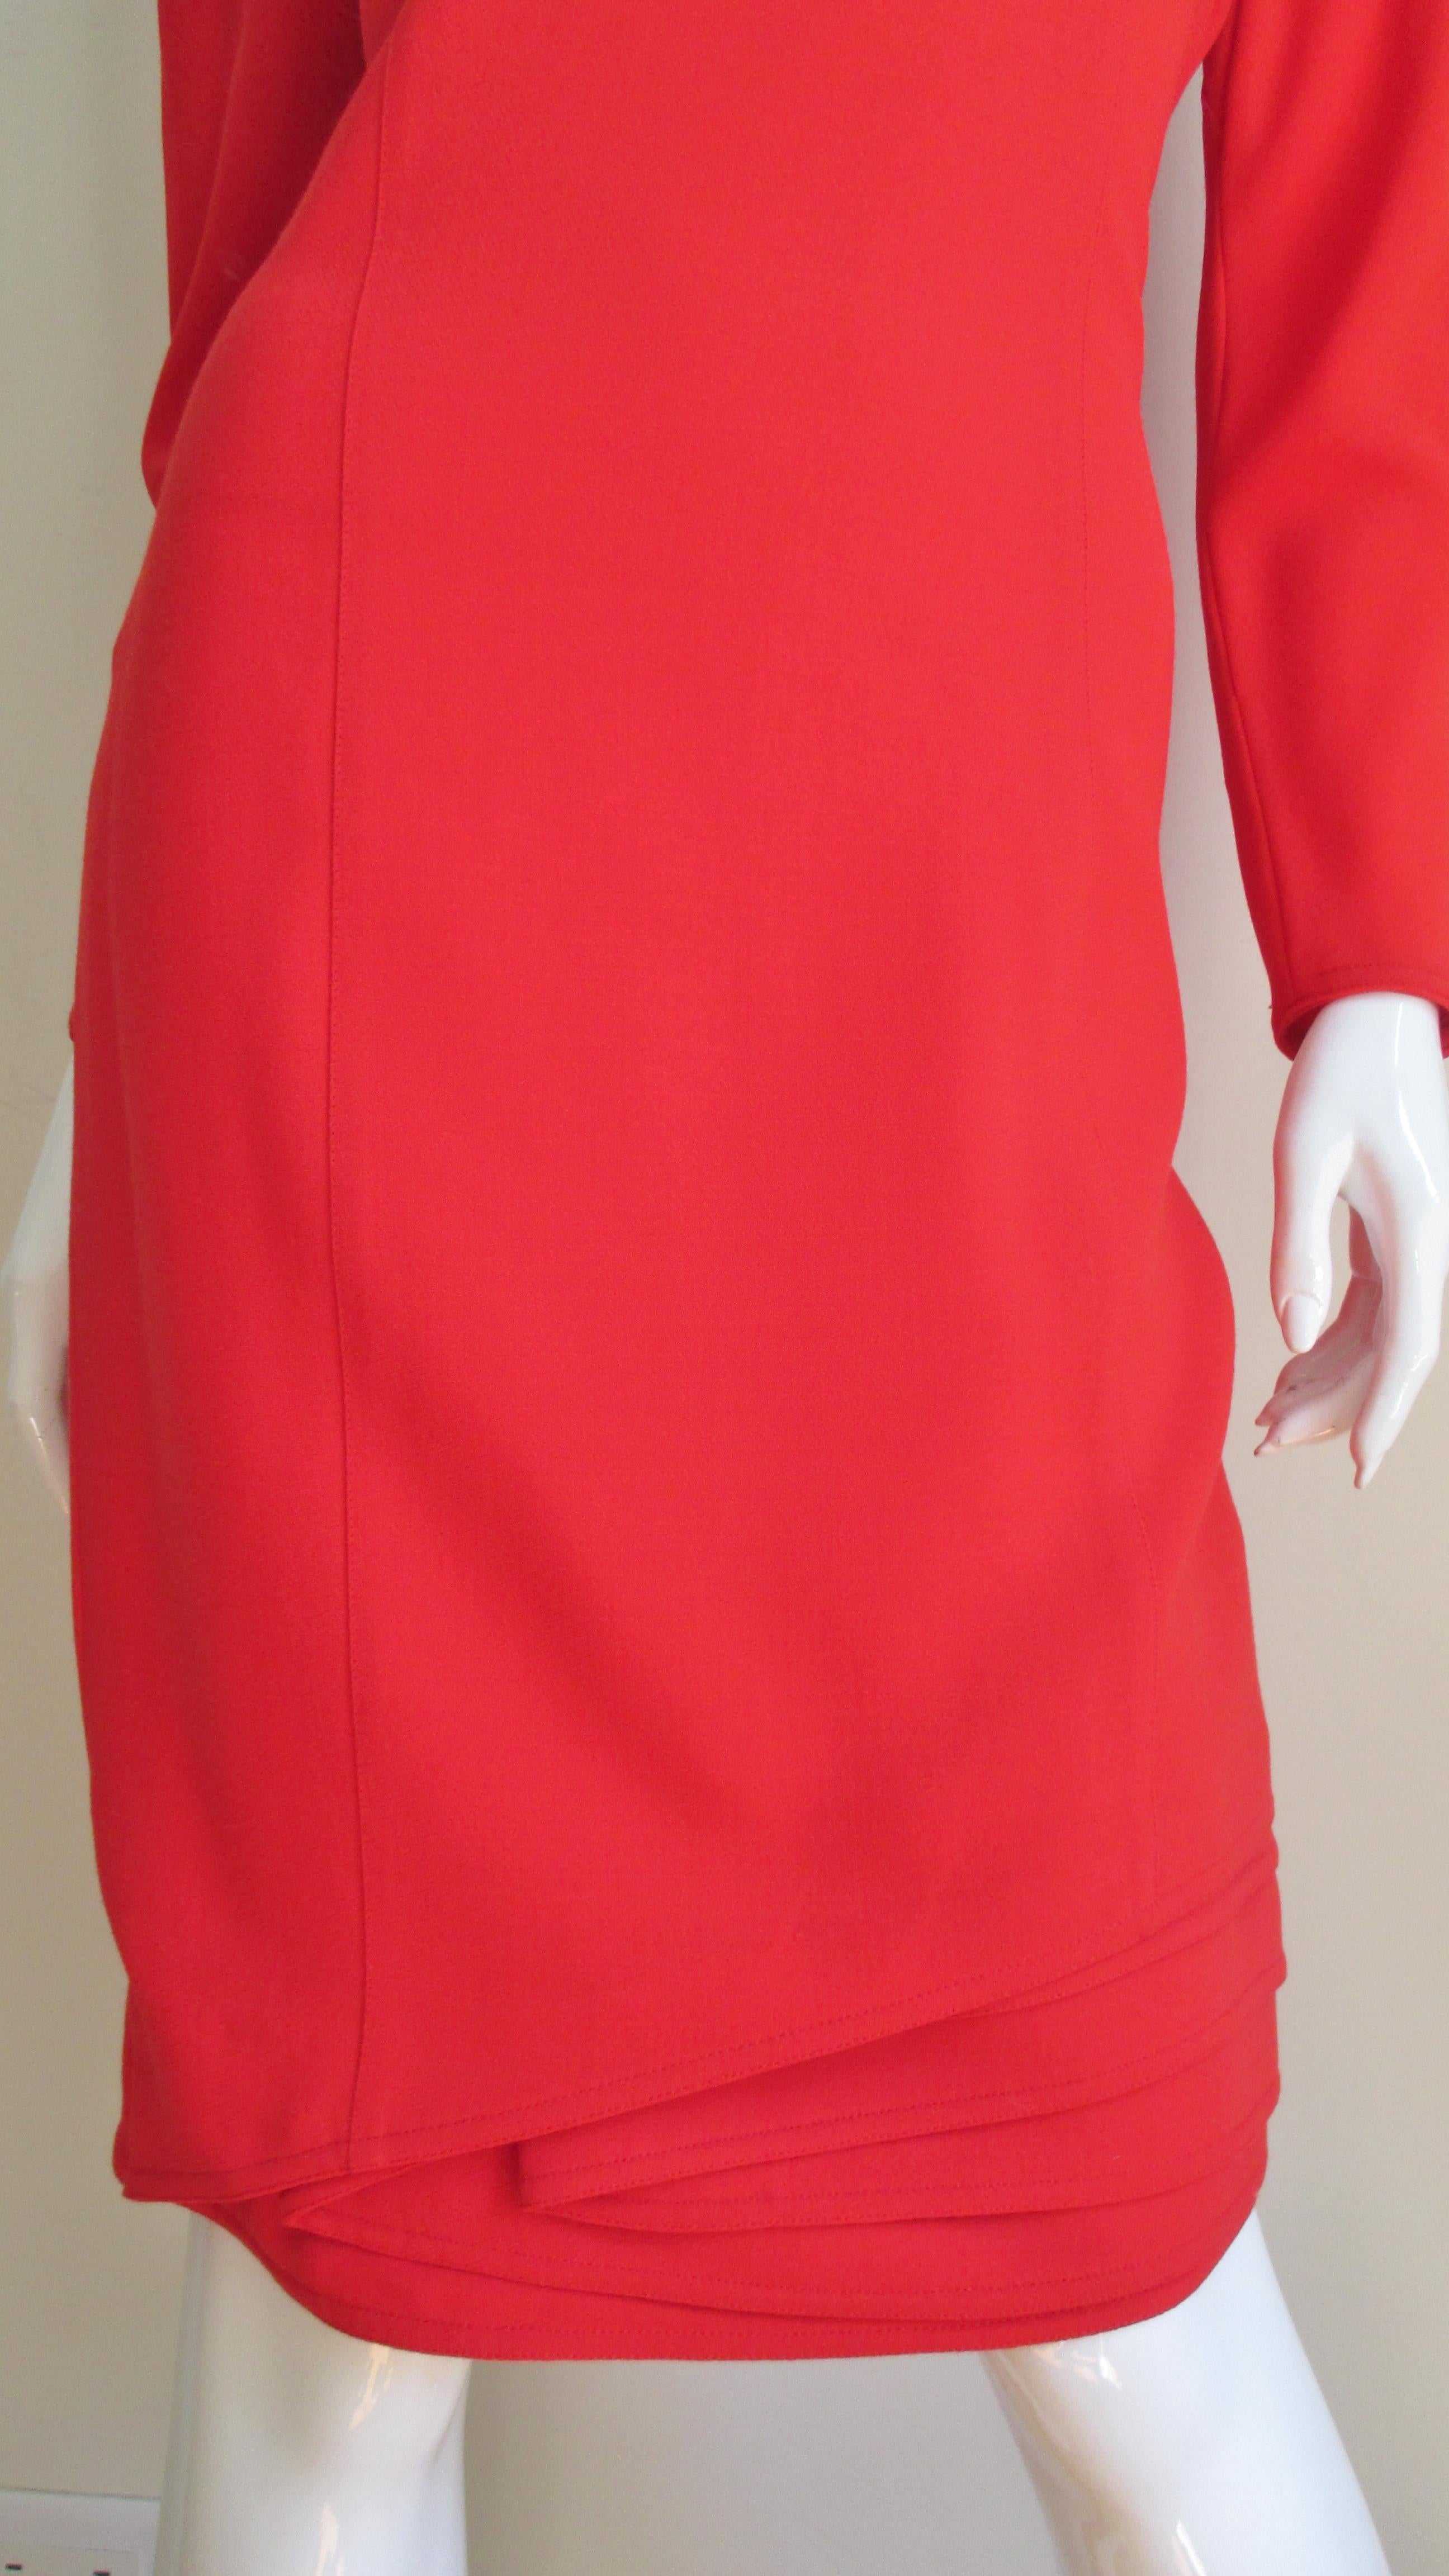 Gianni Versace Orange Dress with Layered Hem 1990s In Excellent Condition For Sale In Water Mill, NY